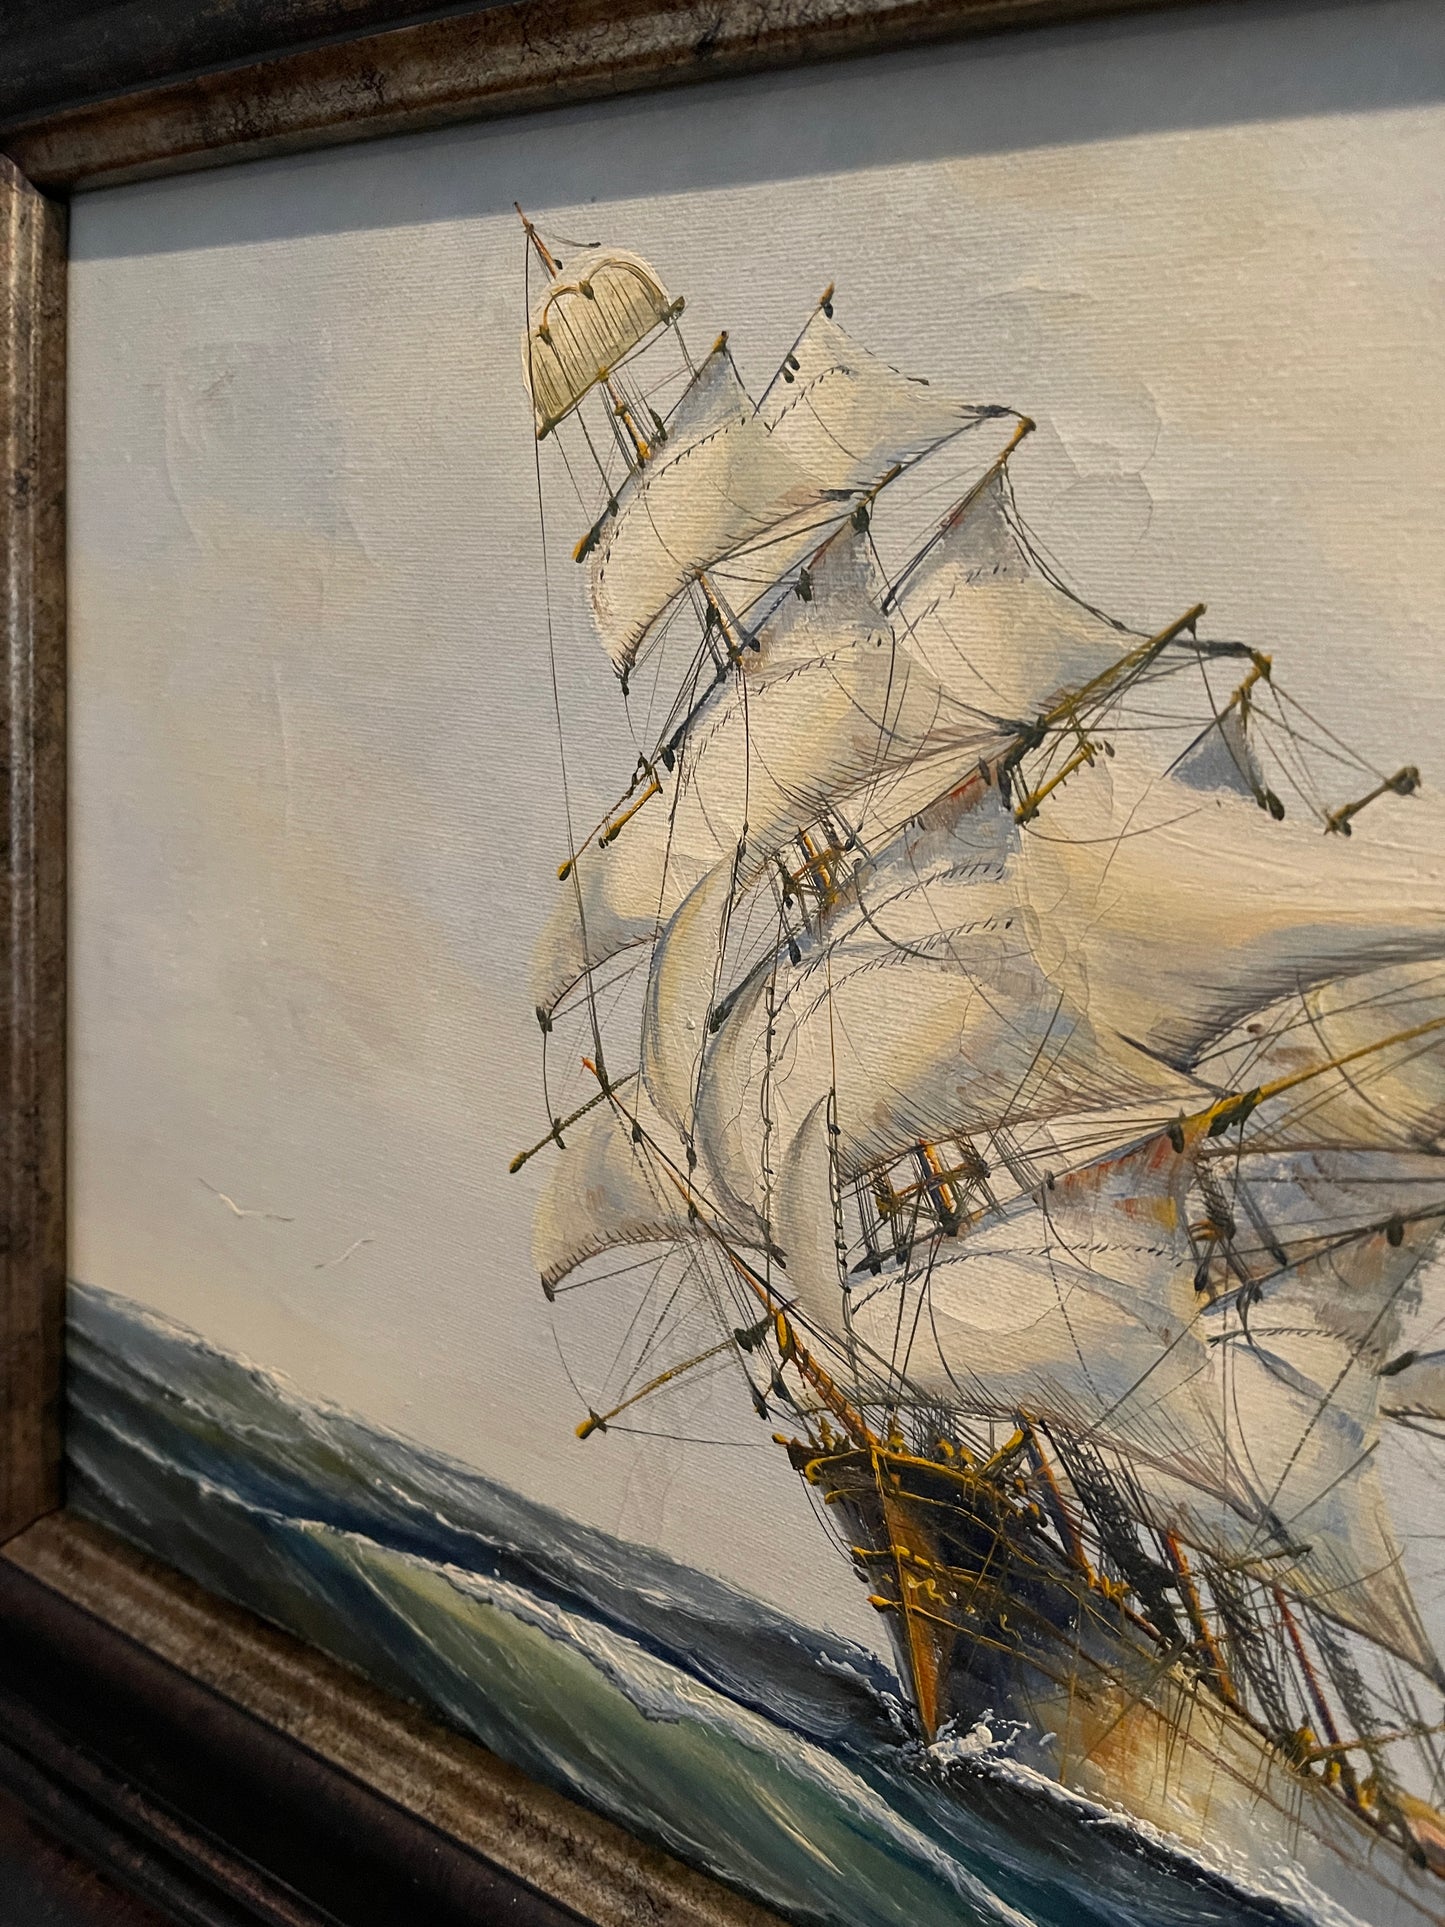 Vintage Clipper Ship Oil Painting by British Artist, John Ambrose (1931-2010)